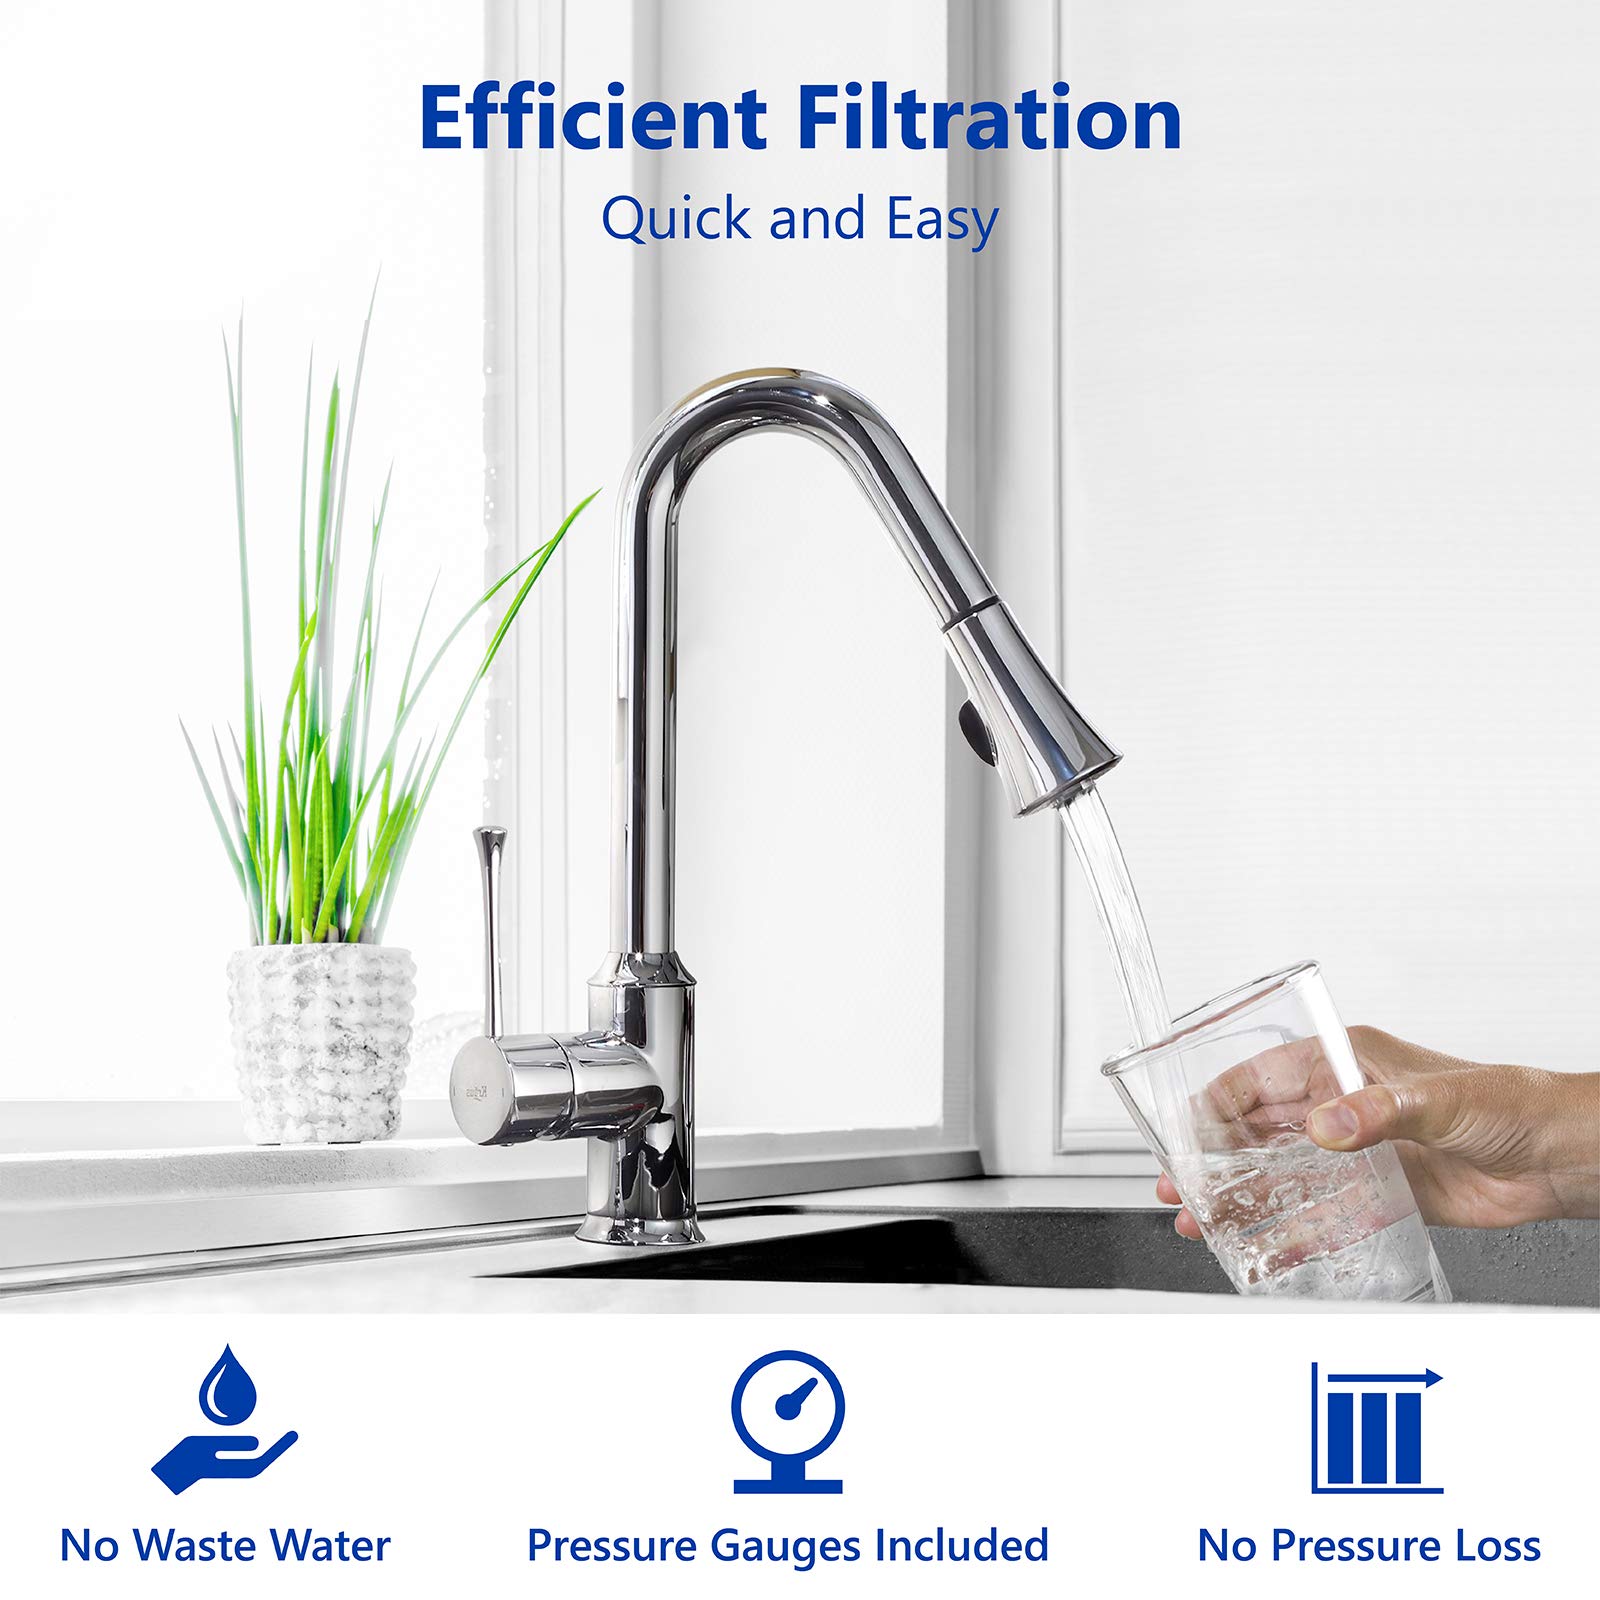 Express Water Heavy Metal Whole House Water Filter - 3 Stage Home Water Filtration System